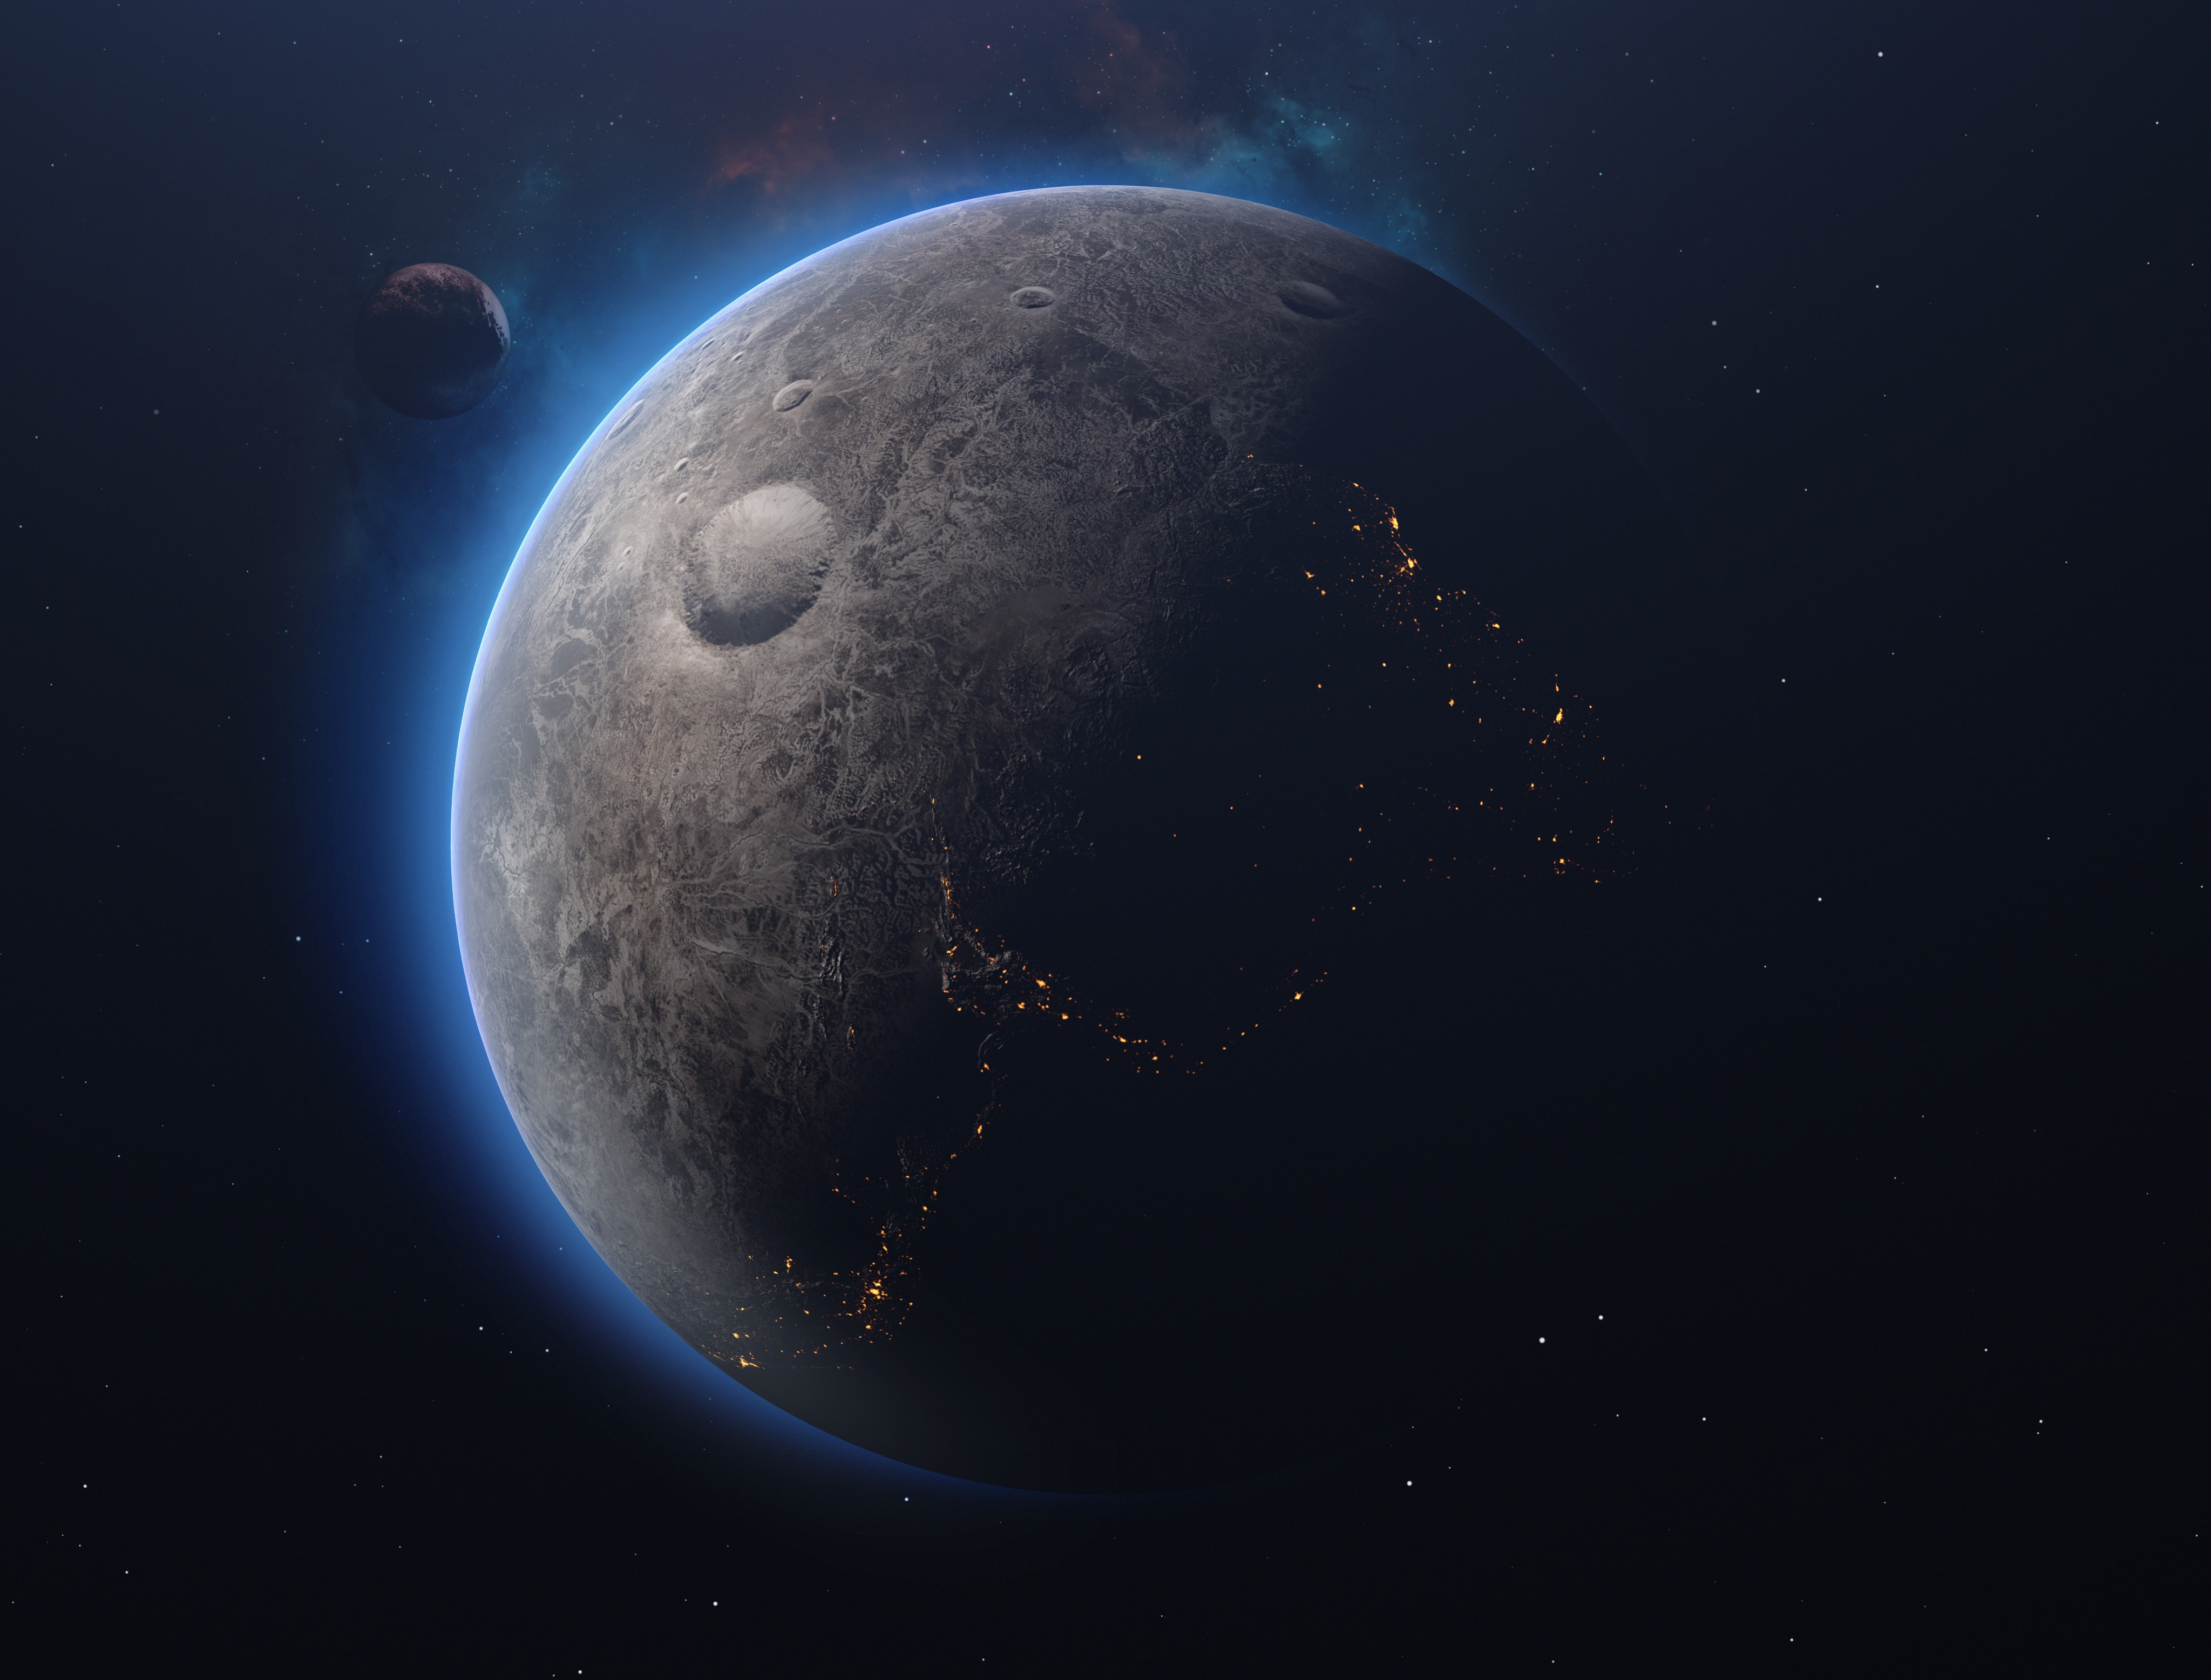 HD wallpaper, Dwarf Planet, Ceres Planet, Solar System, Cosmos, Night Lights, Outer Space